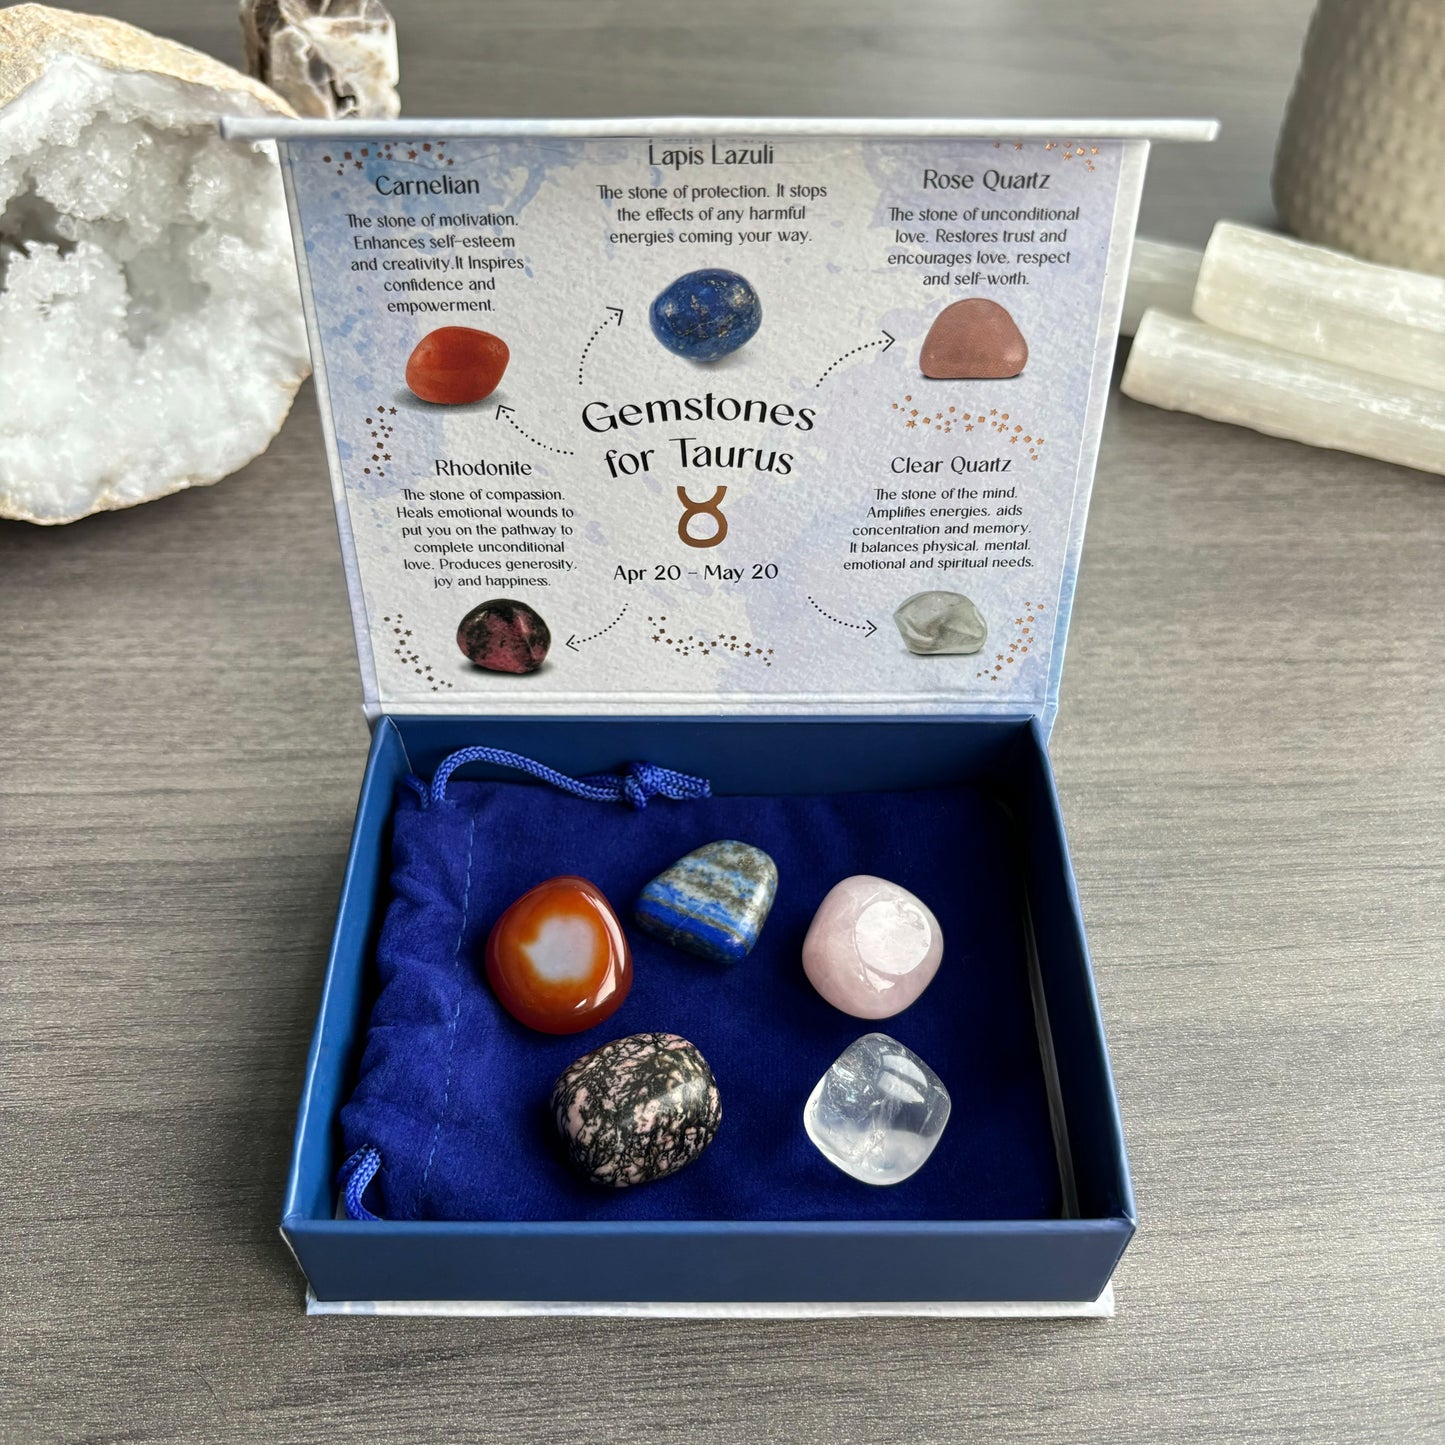 This stunning set of five crystal tumblestones are perfect for the patient, loyal and determined Taurus. The set includes Carnelian for motivation, Lapis Lazuli for protection, Rose Quartz for unconditional love, Rhodonite for compassion and Clear Quartz for balance. Beautifully presented in a magnetic closure gift box with information regarding each crystal, and a velvet drawstring bag to keep the tumblestones protected